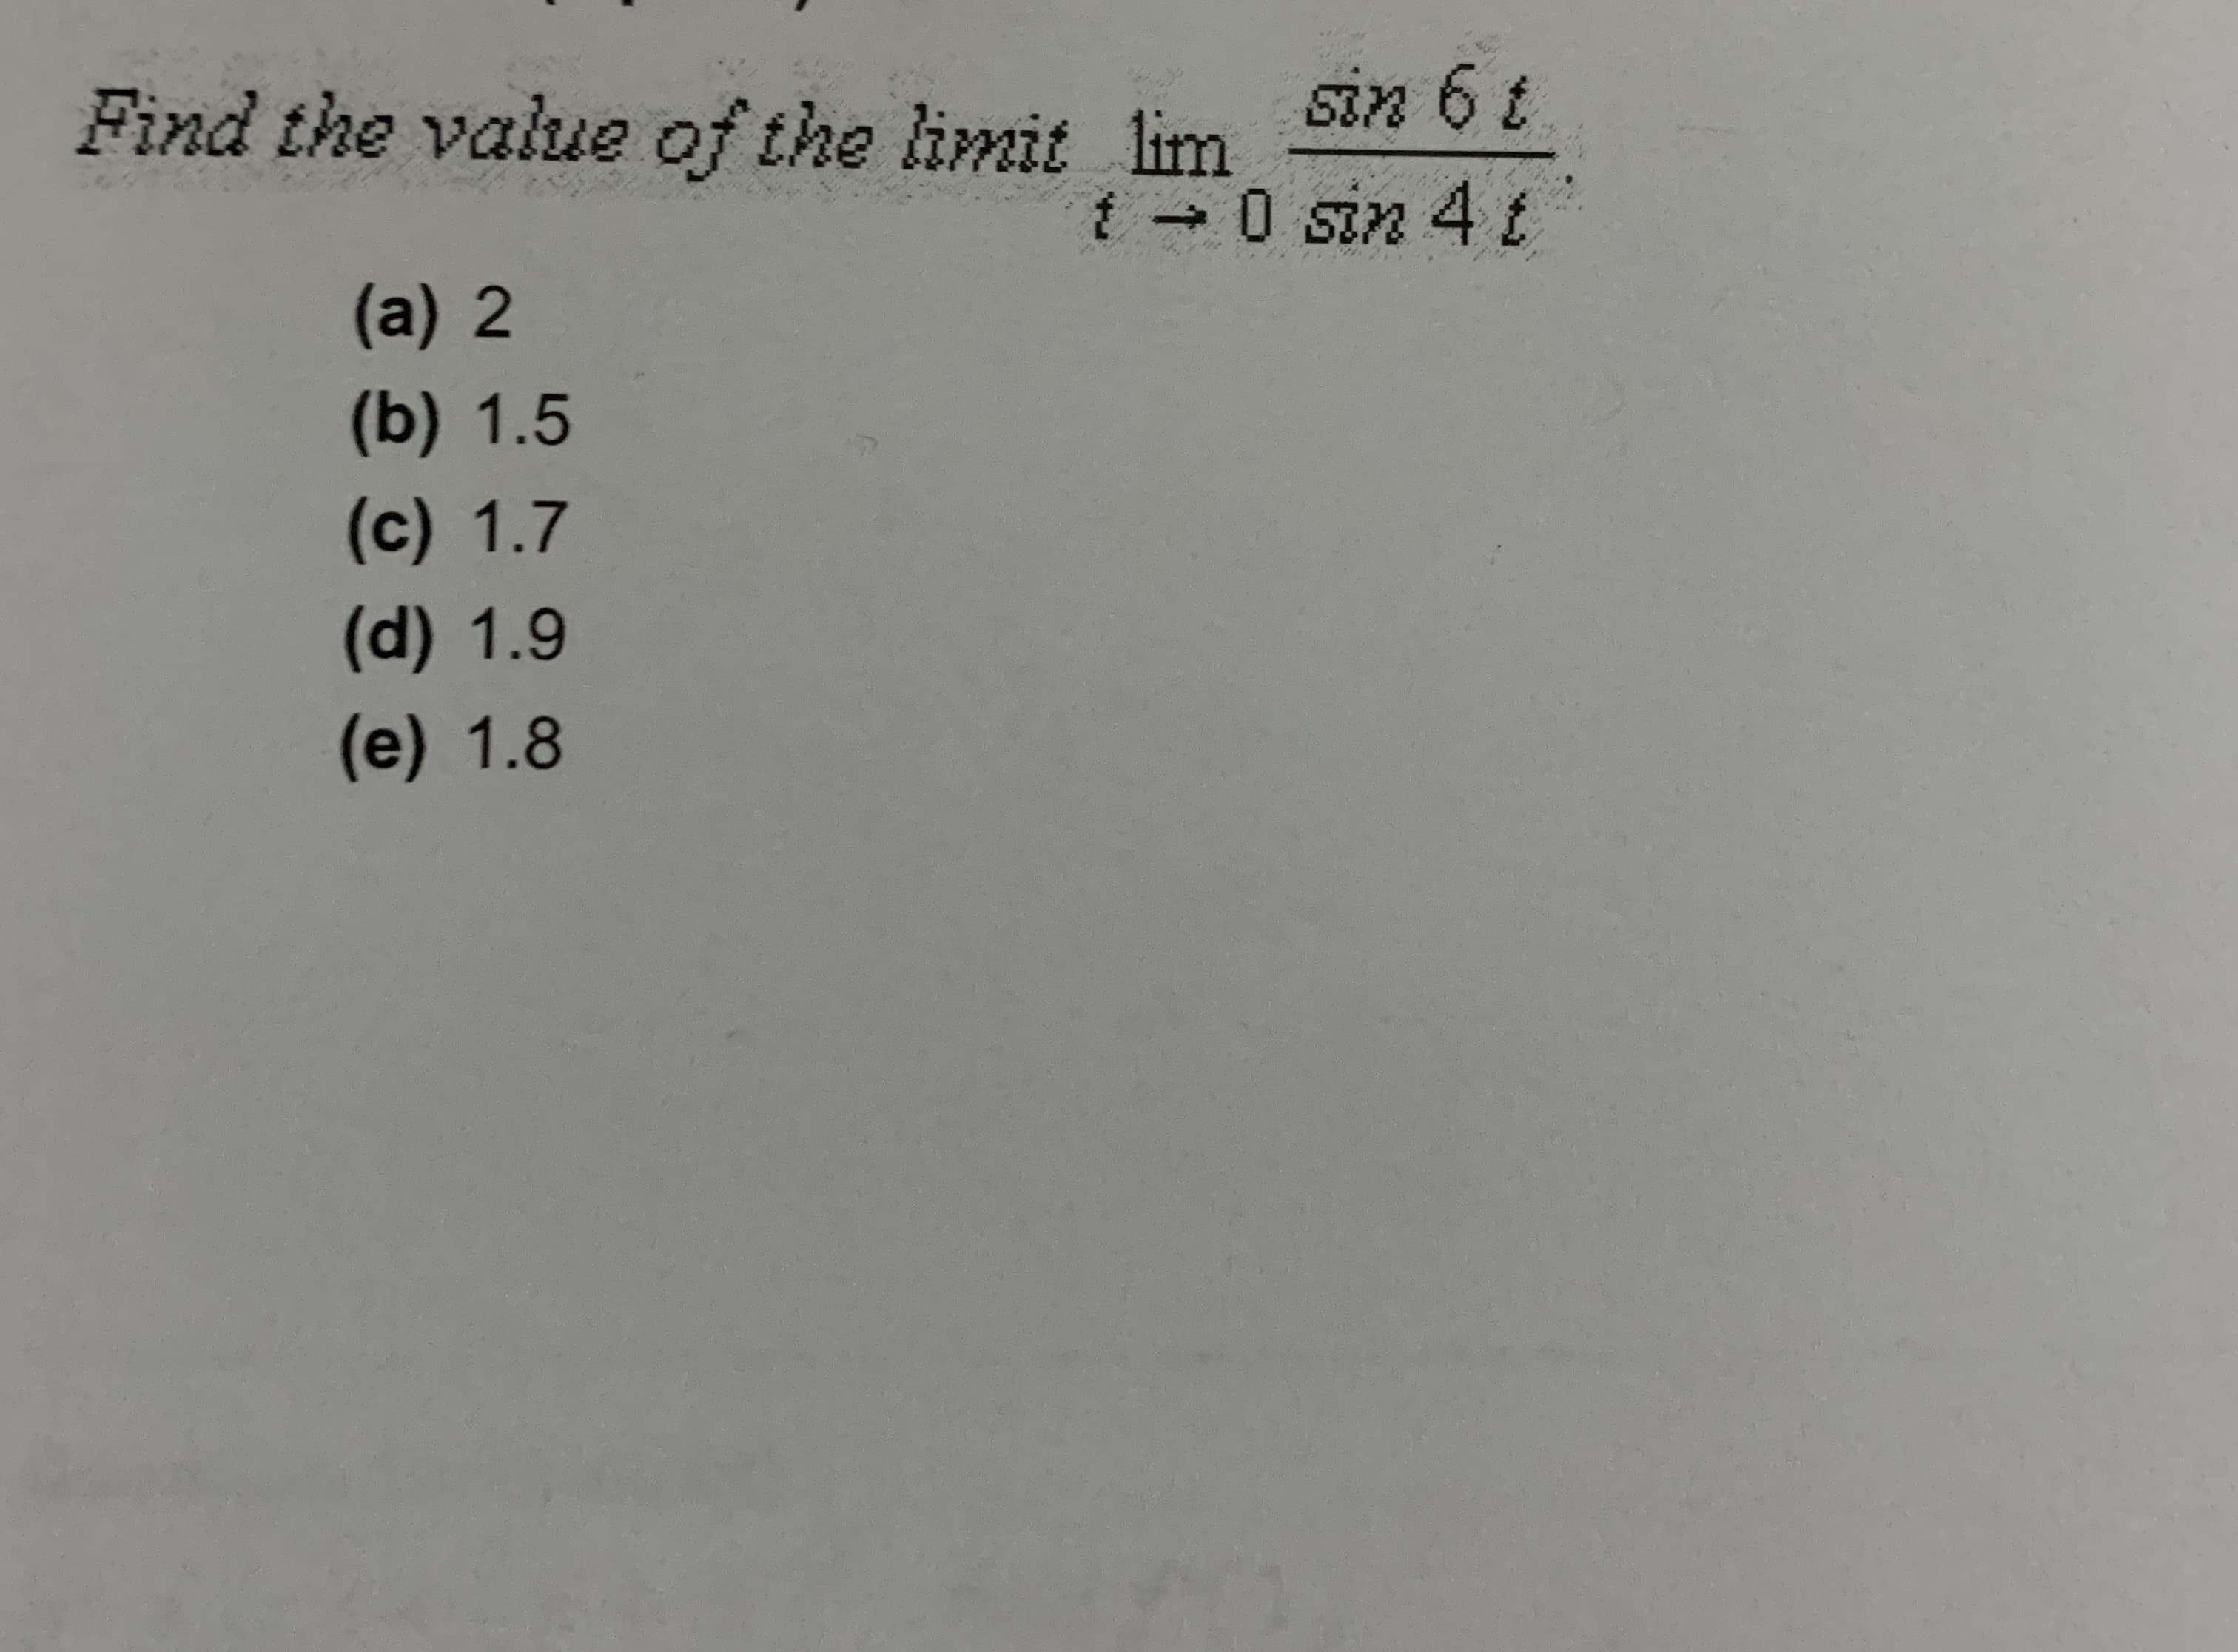 Find the value of the limit lim
sin 6 t
t - 0 sin 4 t
(a) 2
(b) 1.5
(c) 1.7
(d) 1.9
(e) 1.8
